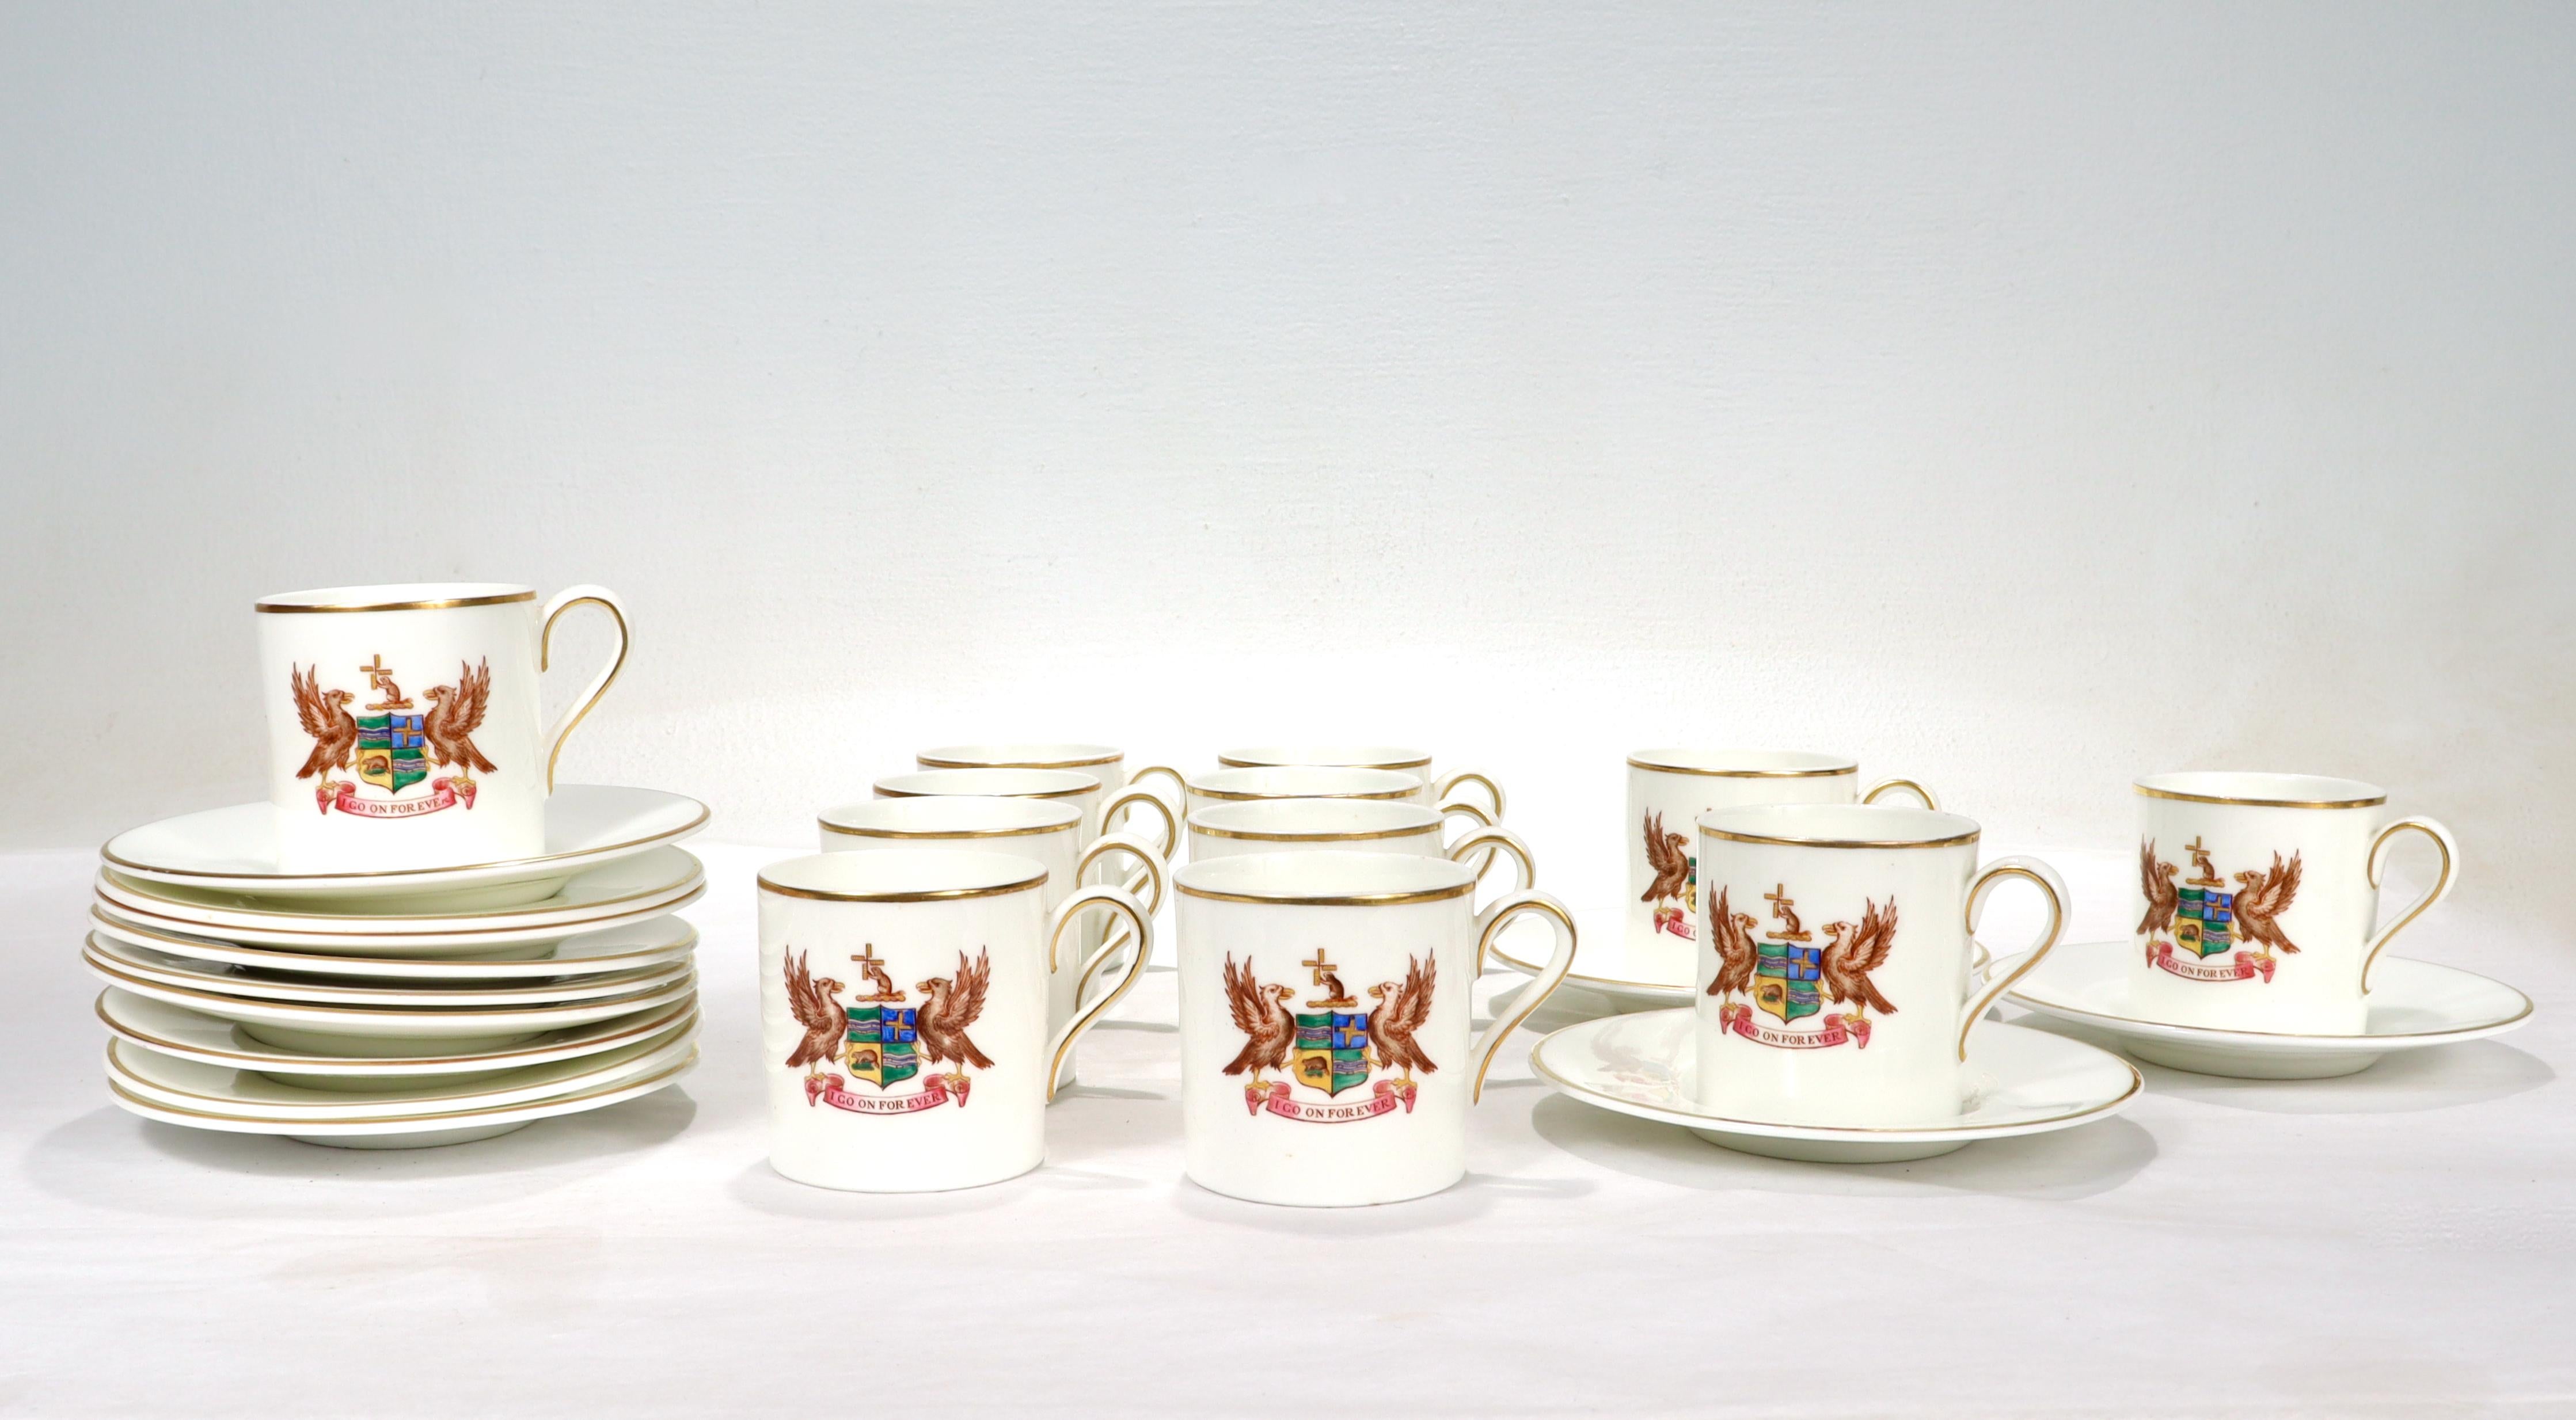 A fine set of 12 bone china cups & saucers. 

By Wedgwood.

Each cup is decorated with the crest of The Brook, a New York City private gentleman's club founded in 1903. 

Below the crest is the club motto of: 